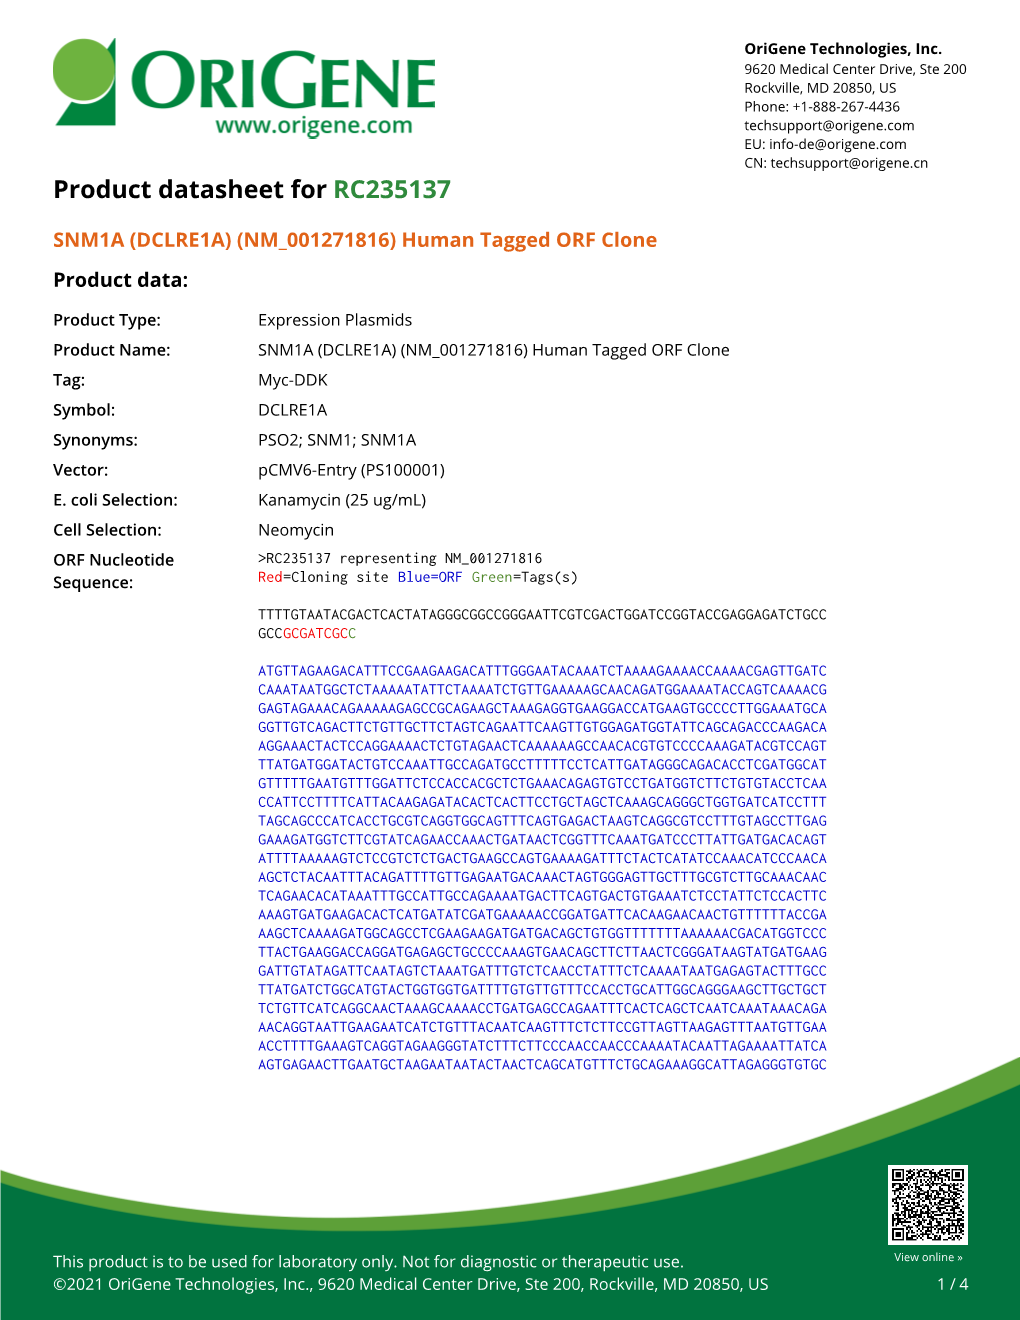 SNM1A (DCLRE1A) (NM 001271816) Human Tagged ORF Clone Product Data